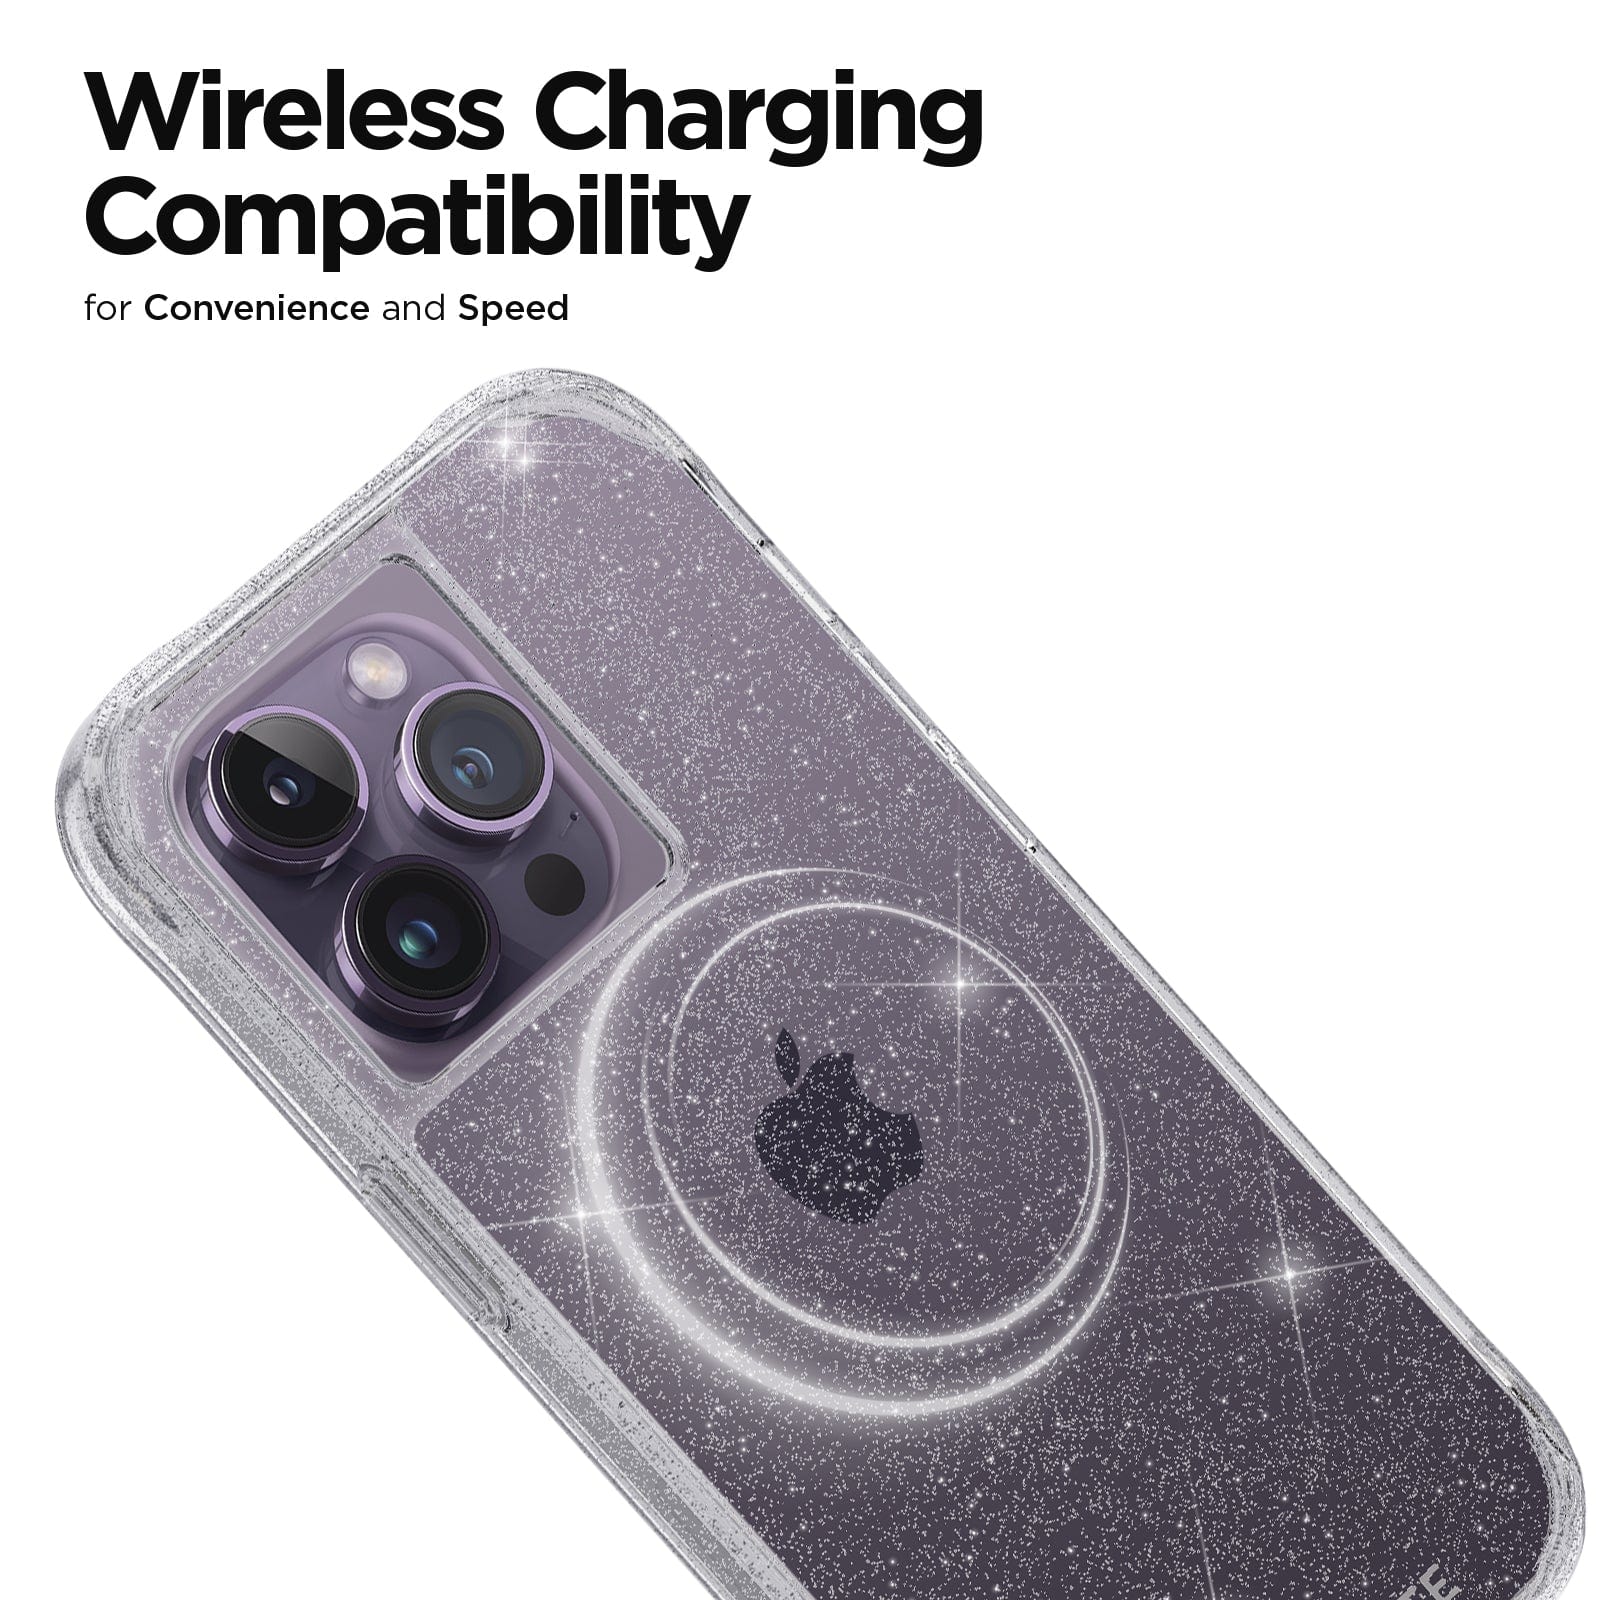 WIRELESS CHARGING COMPATIBILITY FOR CONVENIENCE AND SPEED. 